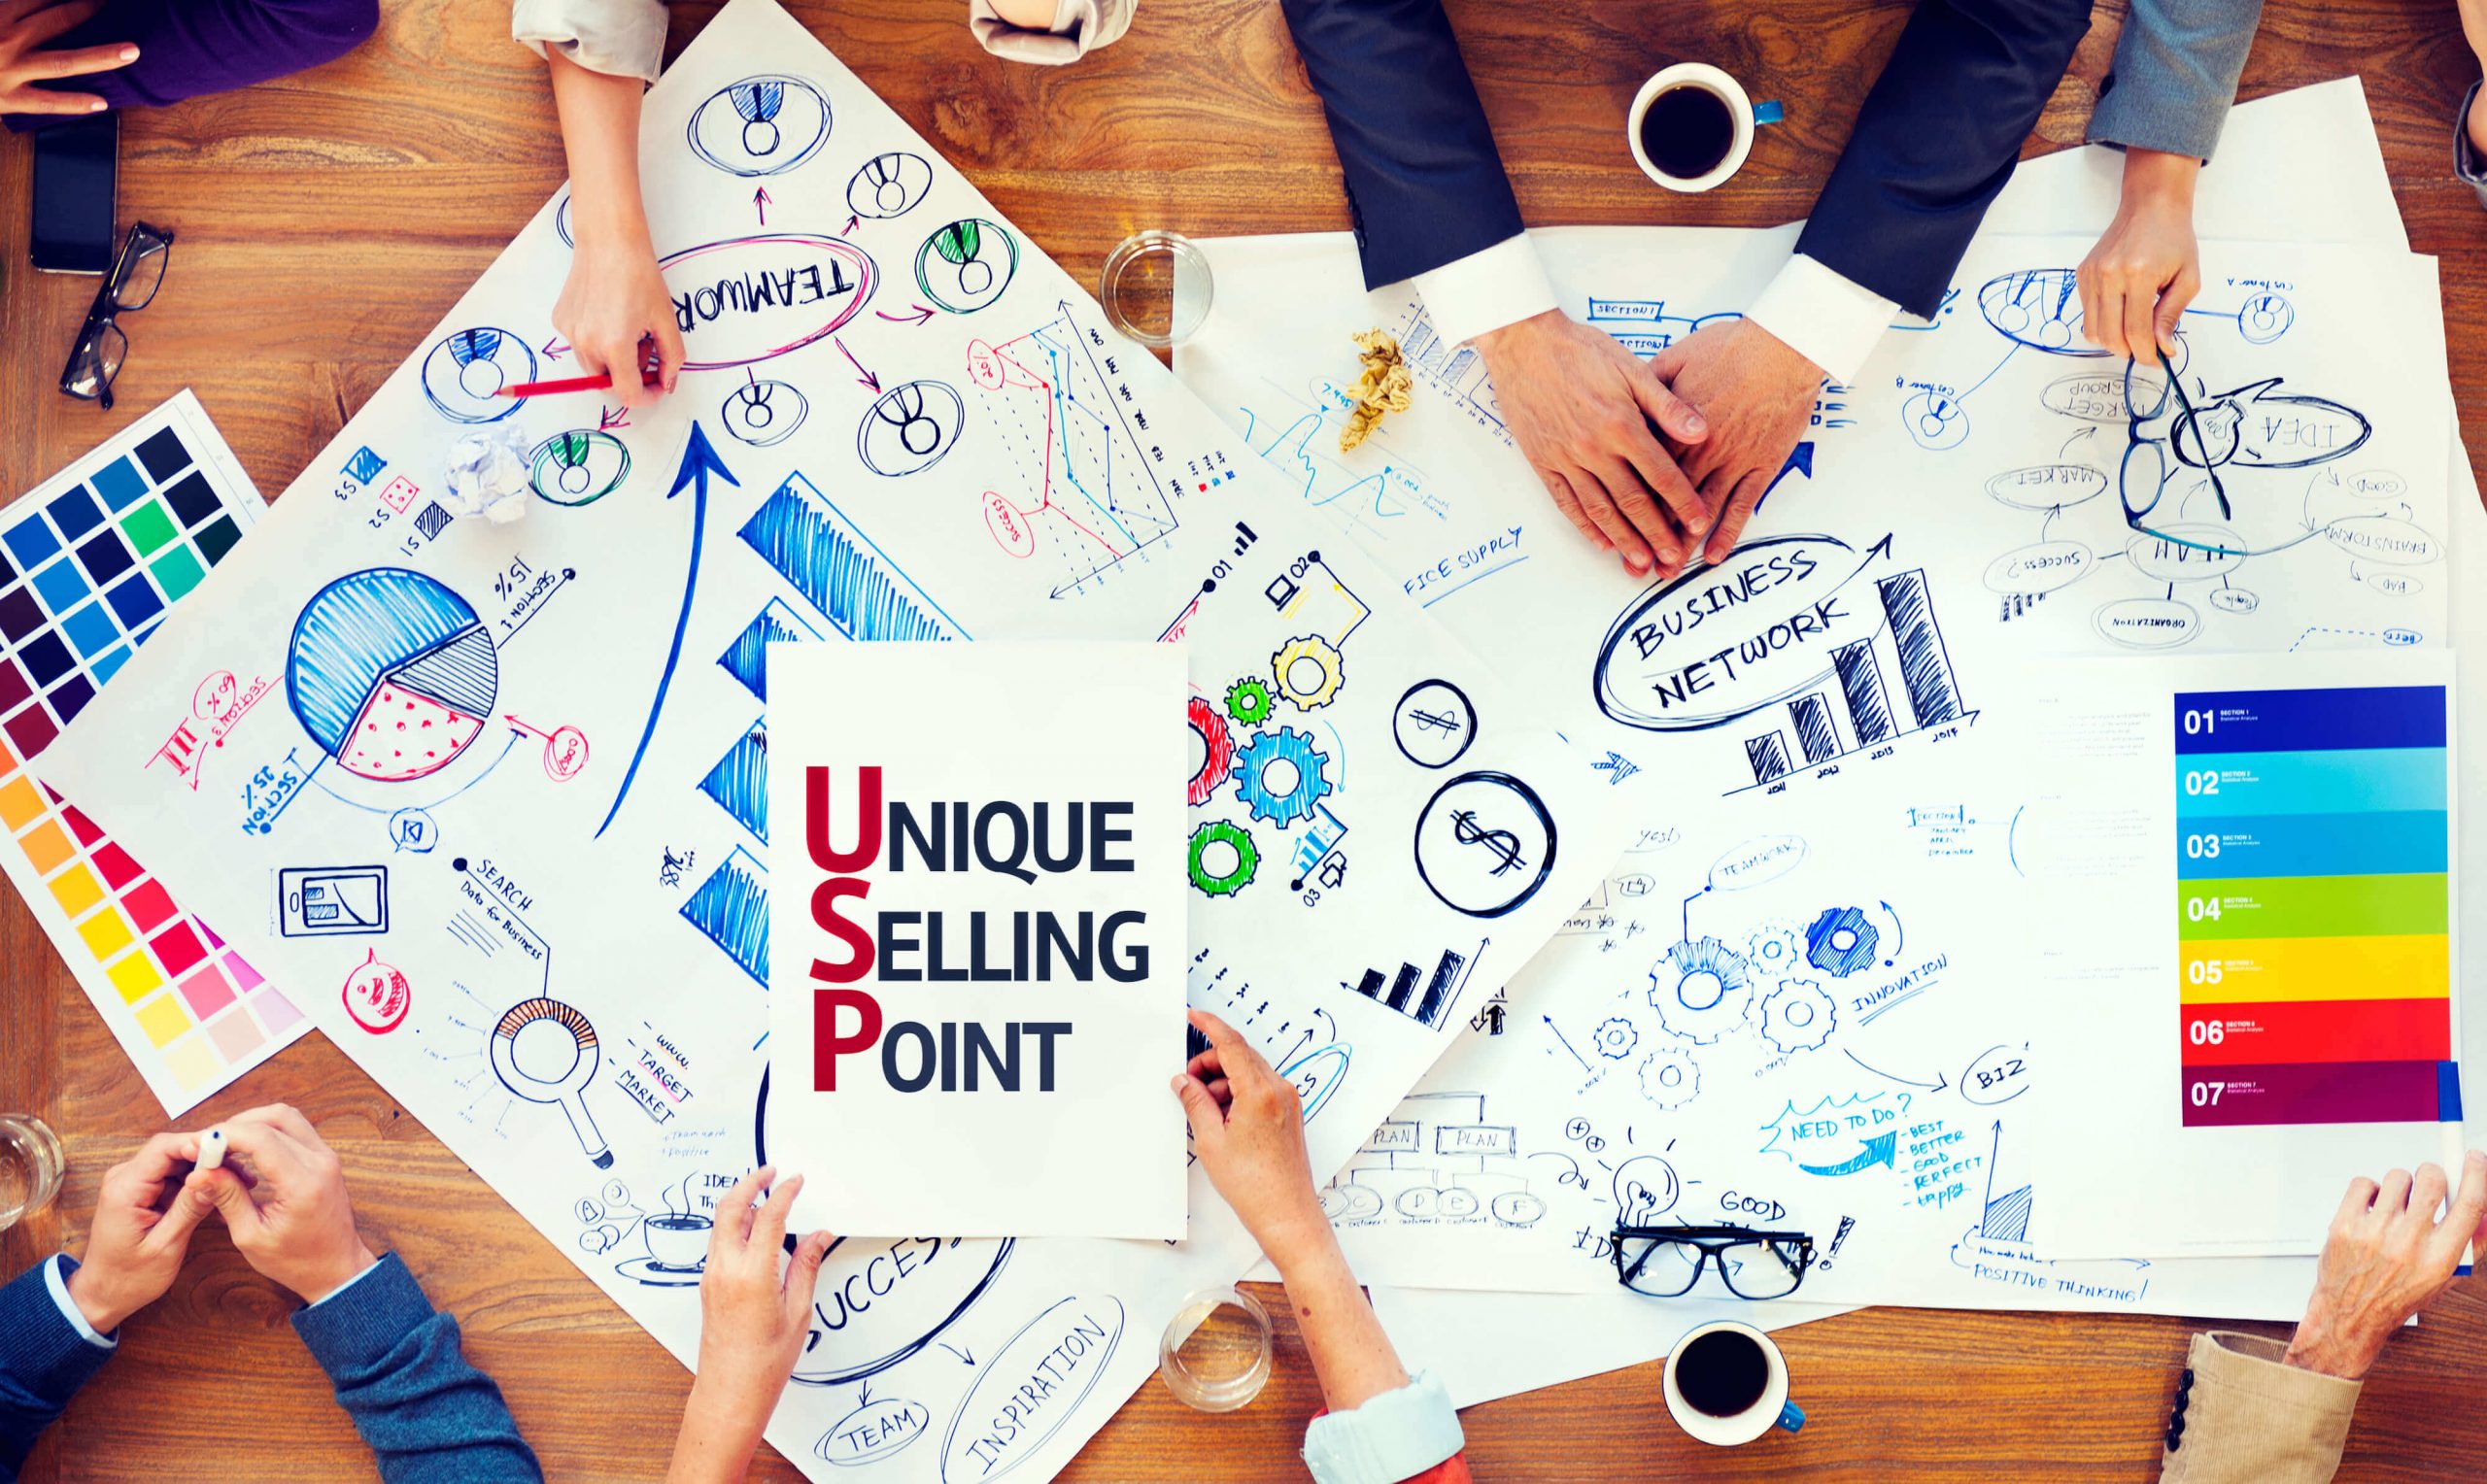 Using unique selling point - i4t Global